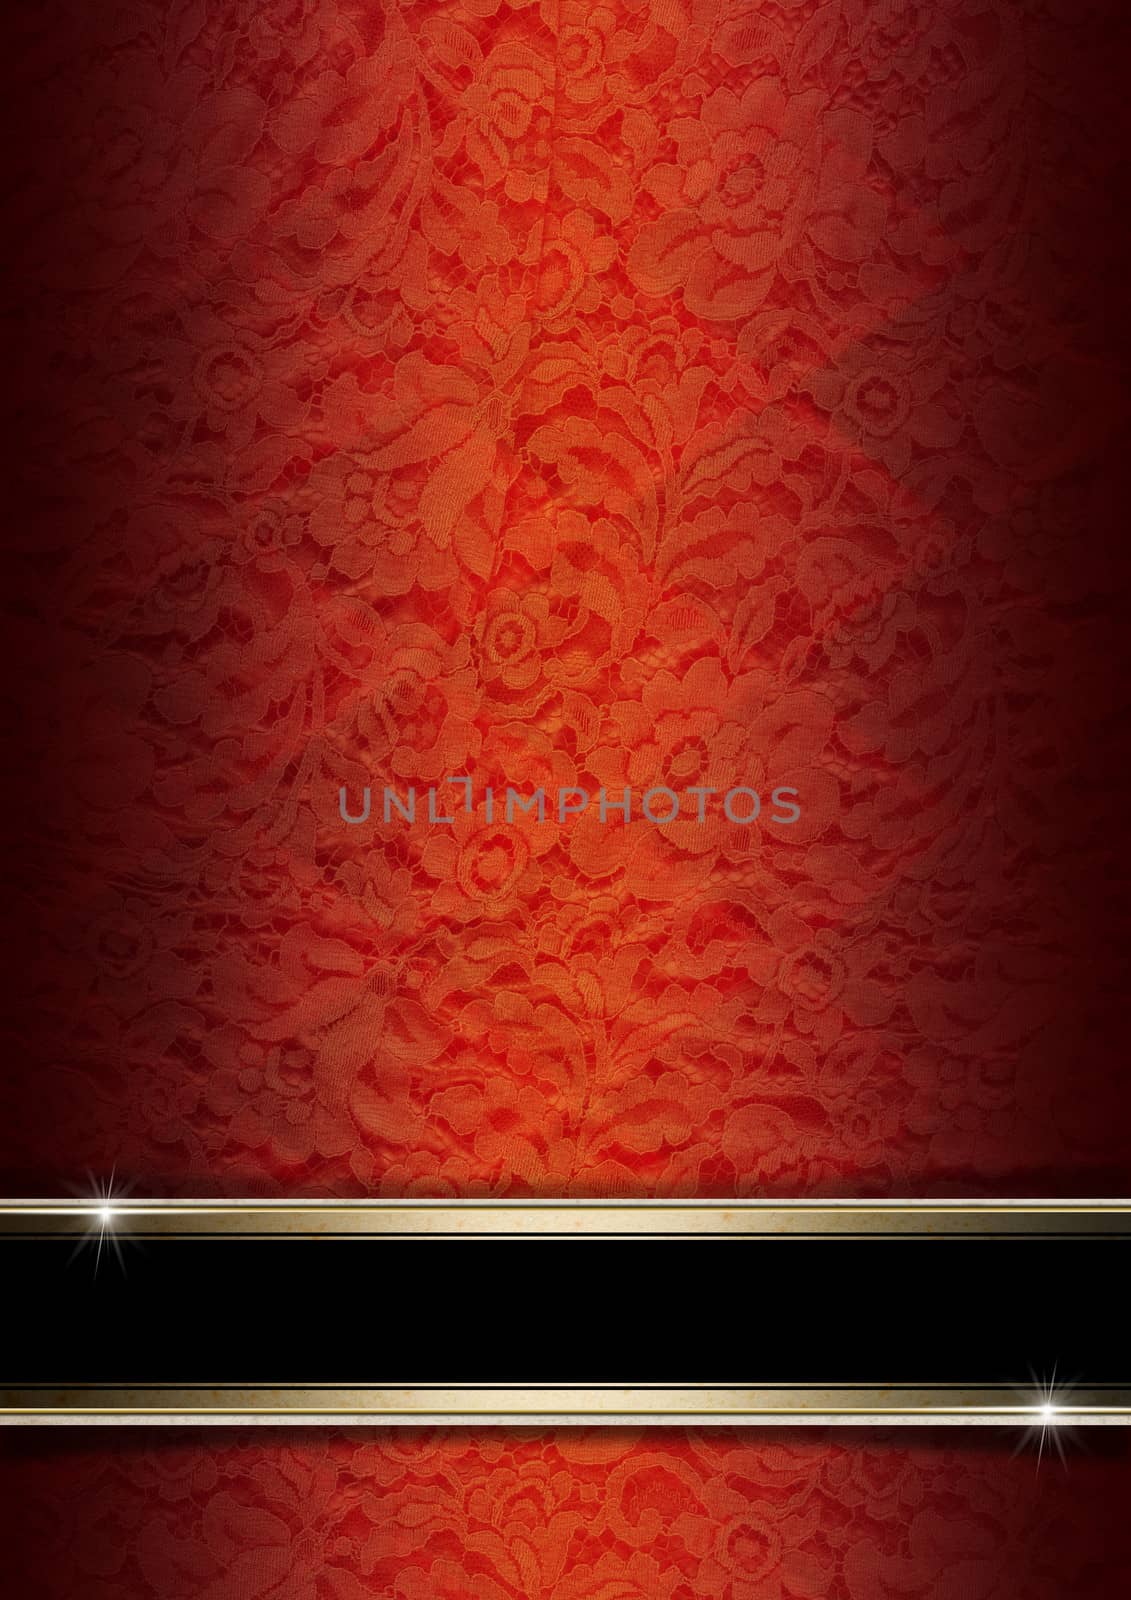 Template of red and orange texture with ornate floral seamless and black plaque with golden frame

